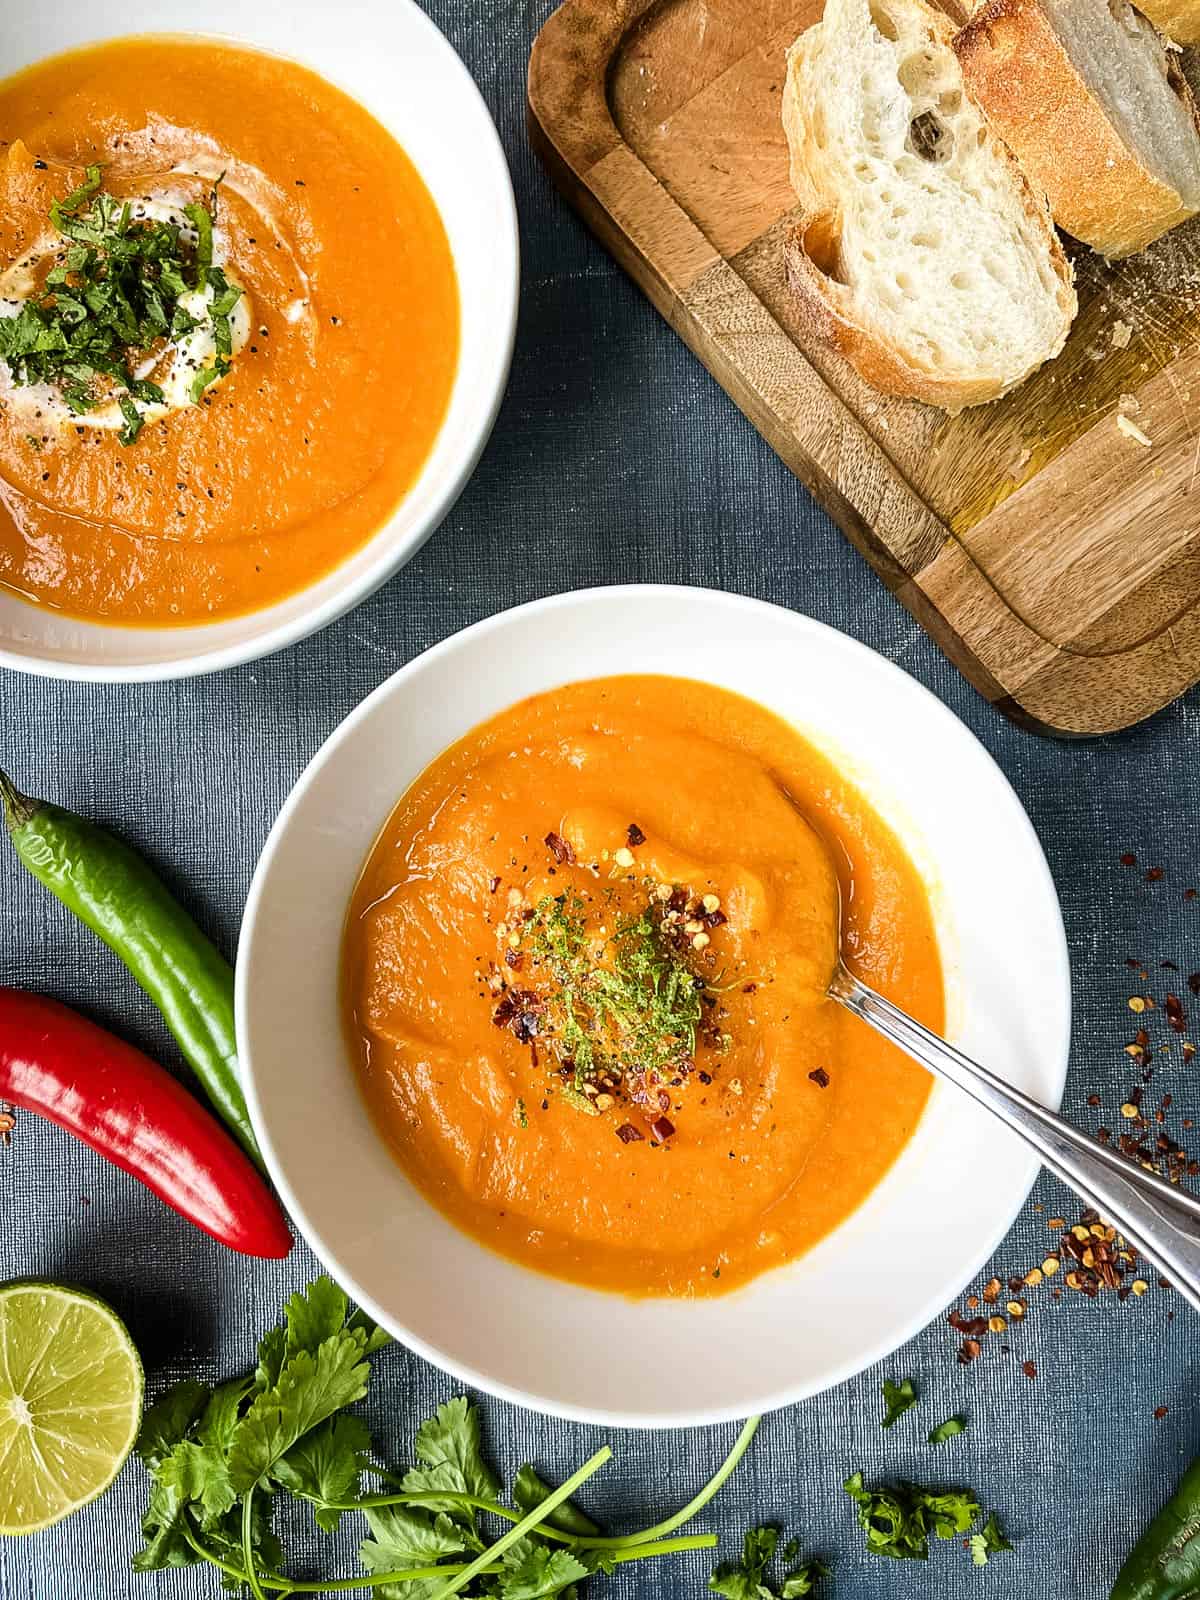 sweet potato soup topped with lime zest and crushed chilli flakes served with crusty bread.